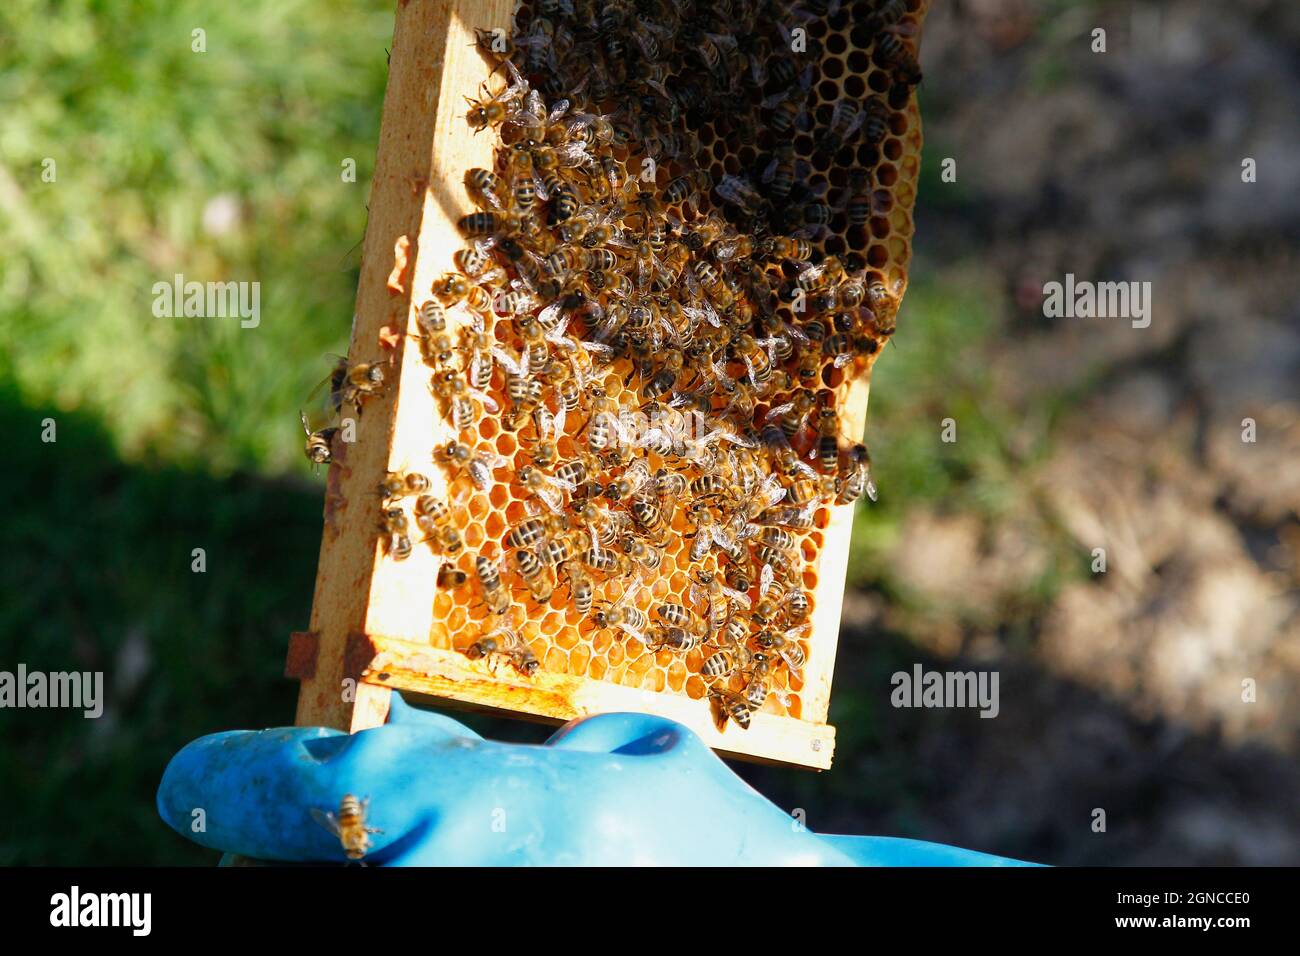 England, Kent, Yalding Organic Gardens, Food, Fresh honey being harvested from bee hive. Stock Photo